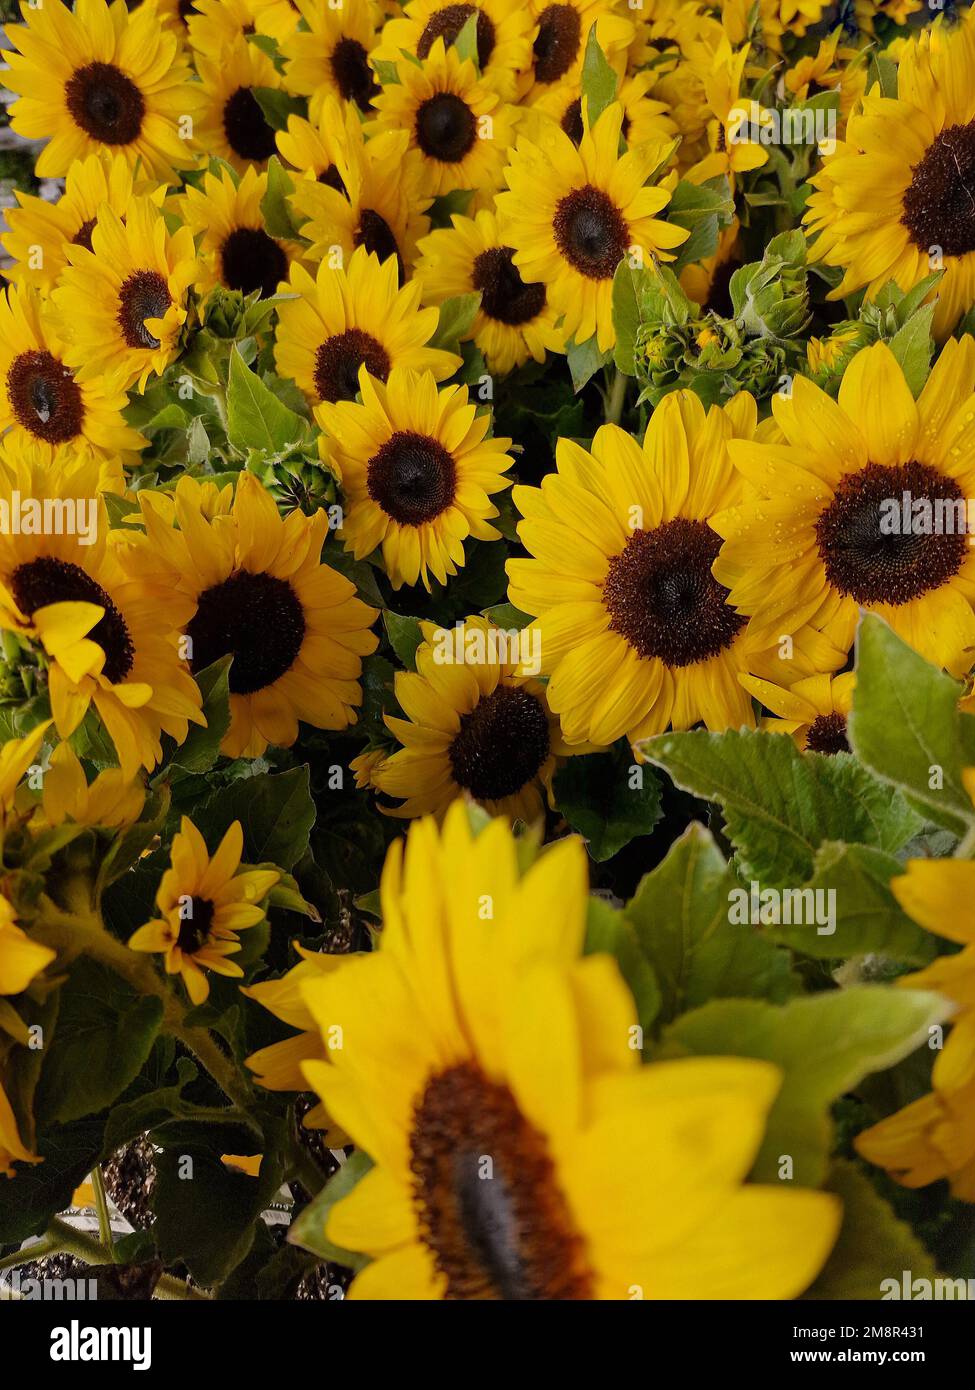 Closeup of yellow flowers of the annual sunflower Helianthus annuus with dark brown centres. Stock Photo